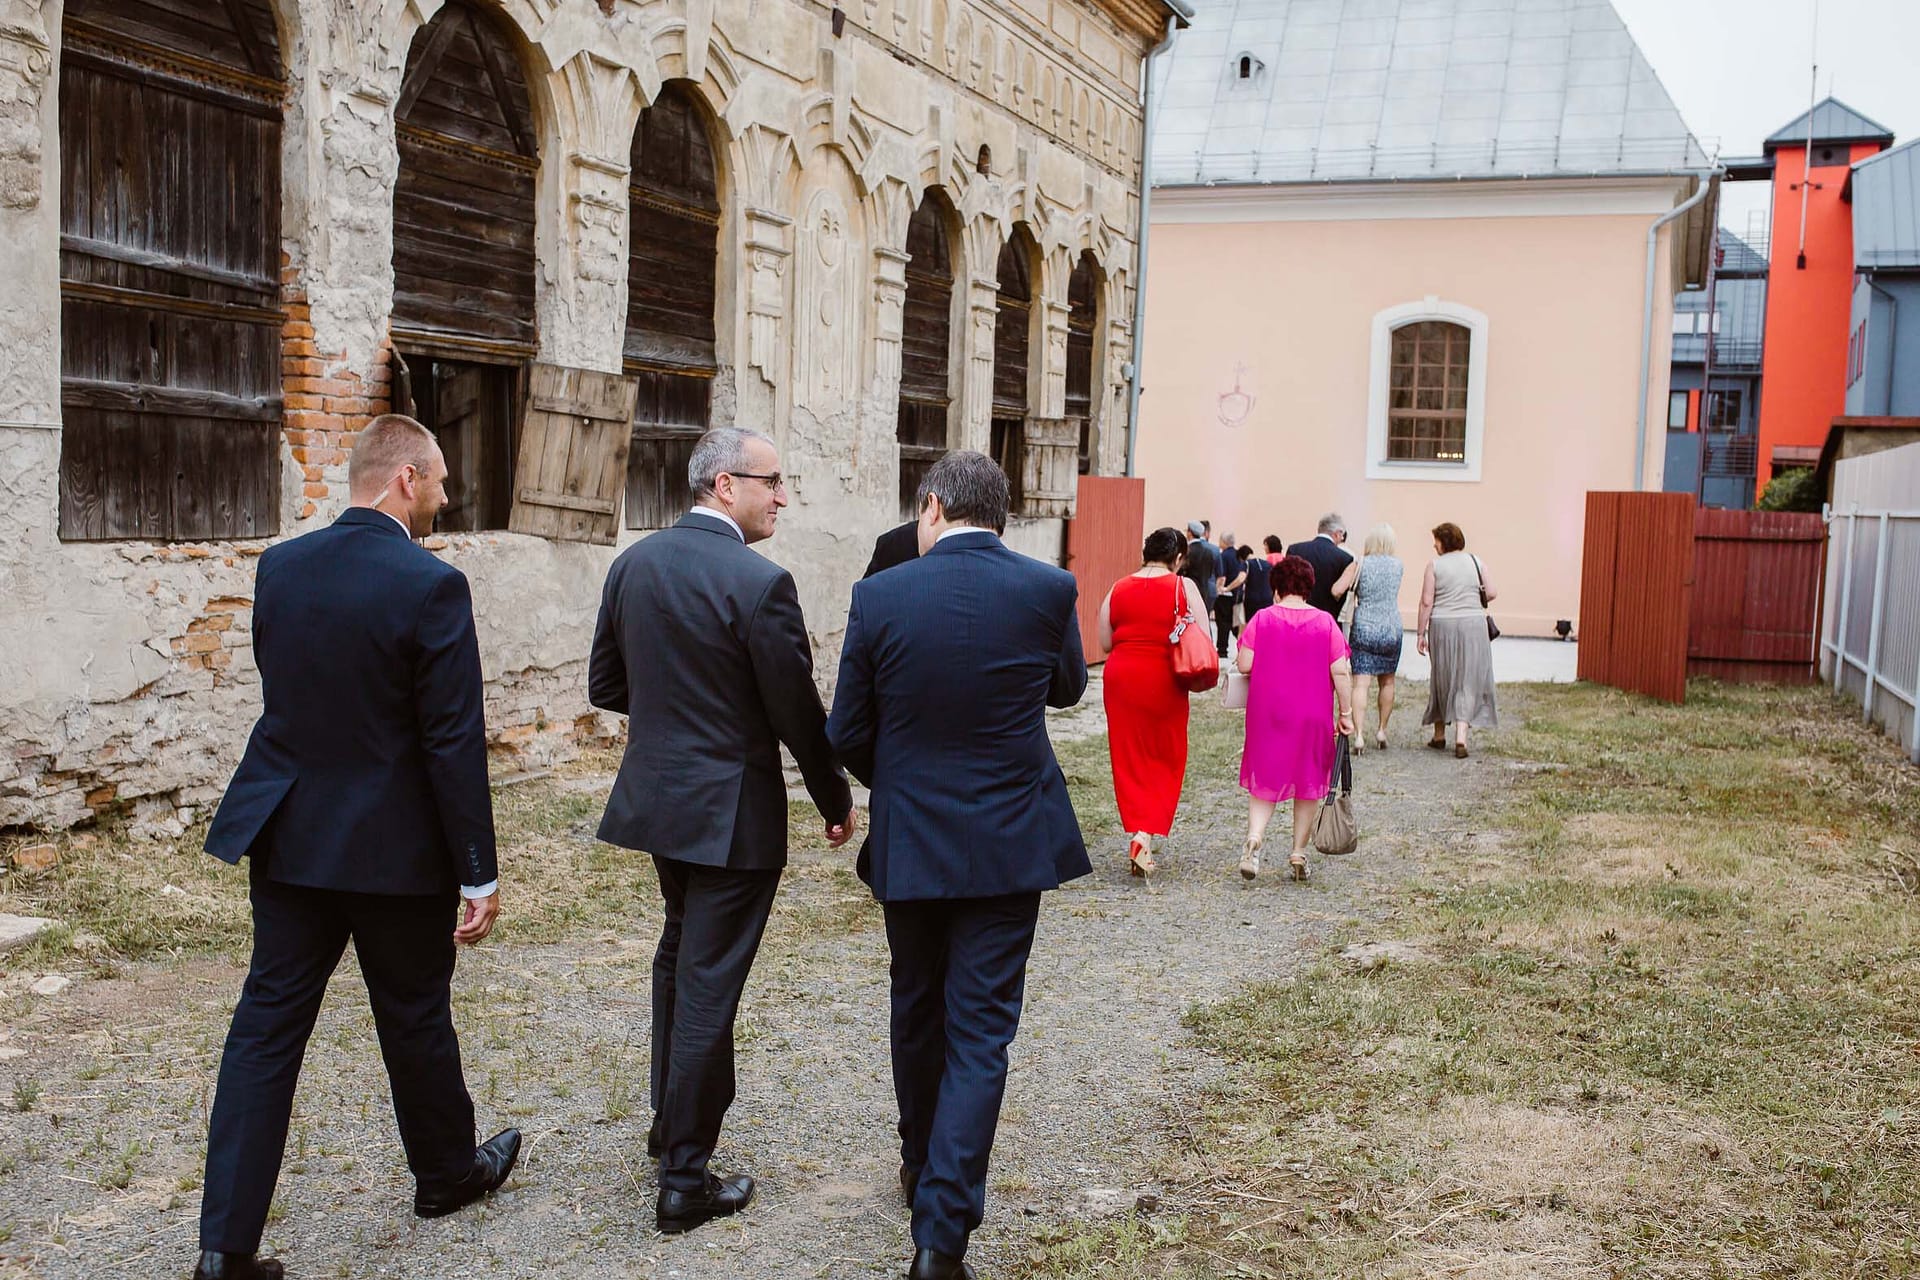 Many of the attendees of the first ceremony walked over to the synagogue afterwards to hear speeches by UZZNO representatives, city and government officials, H.E. Zvi Aviner Vapni, Israeli Ambassador to Slovakia, and Mr. Giora Solar representing the BJPC